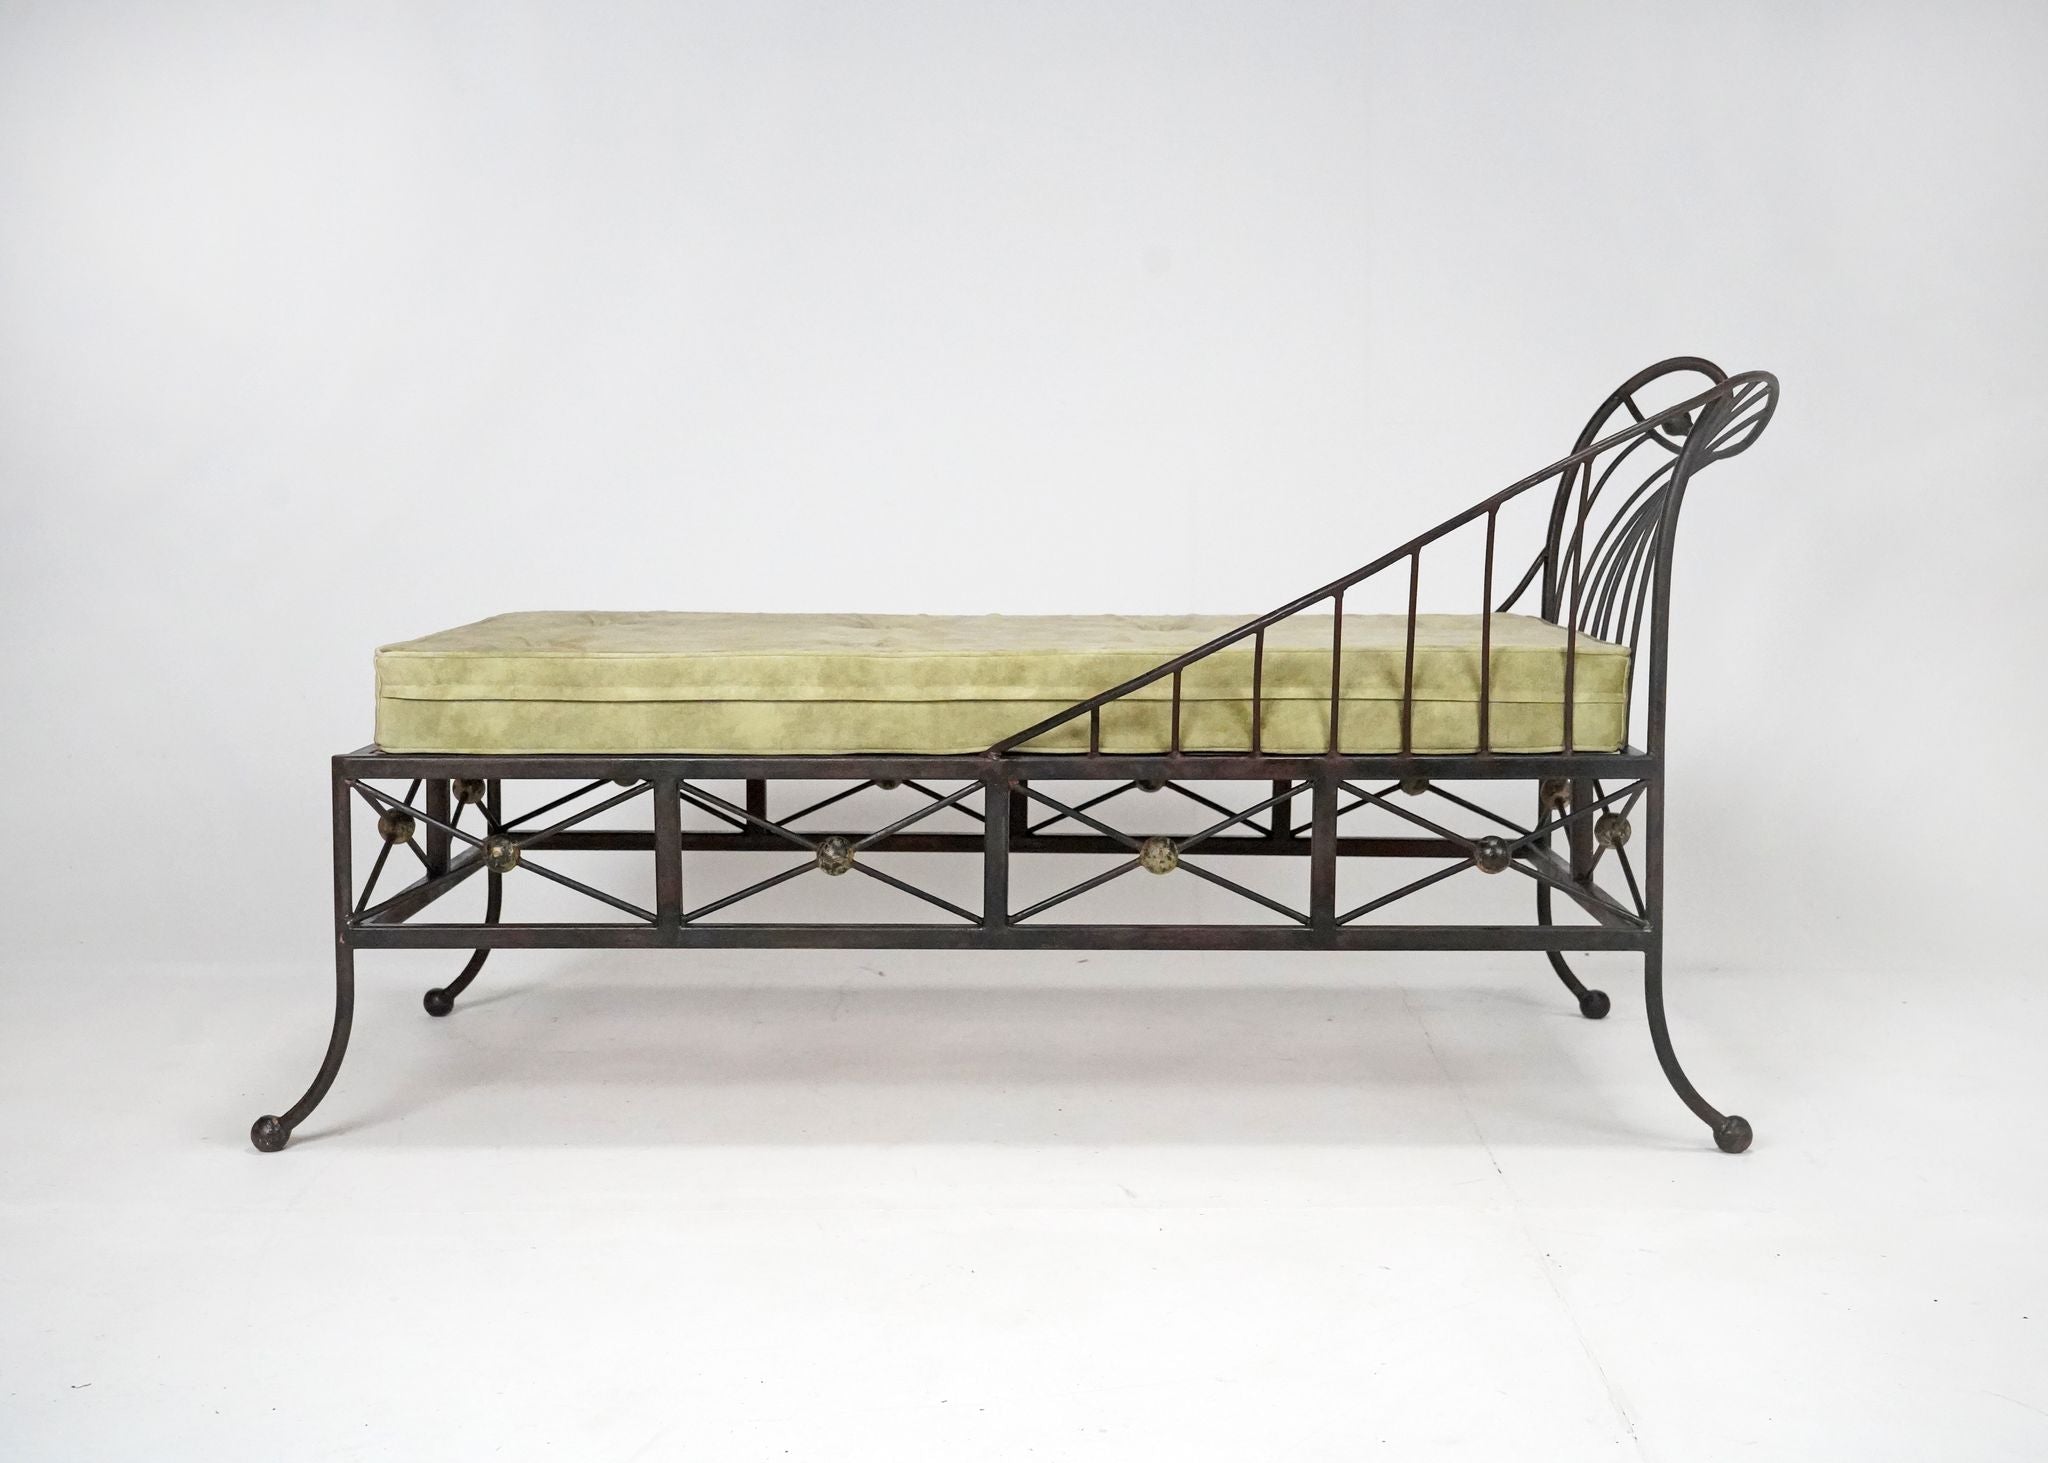 French Sculptural Form Steel Day bed